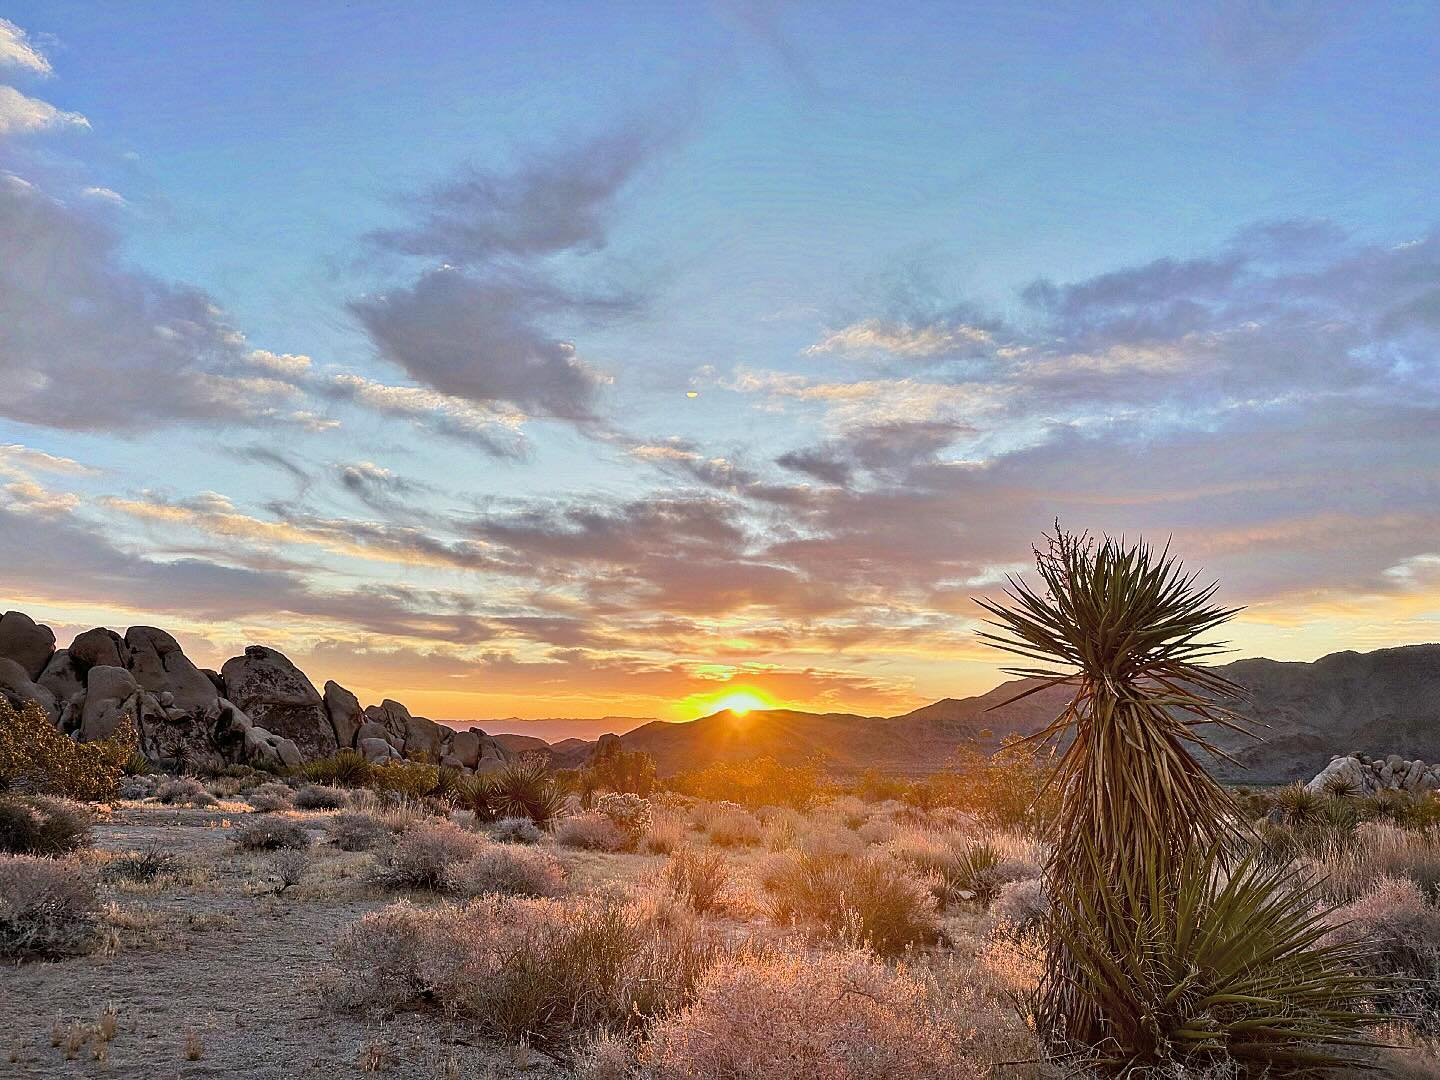 Joshua tree sunrise this morning did not disappoint. 

I&rsquo;m having one of those &hellip;
&ldquo;What does it mean that the world is so beautiful and what am I to do about it?&rdquo;
&hellip;moments

And I know what to do now &hellip;
Stop what I